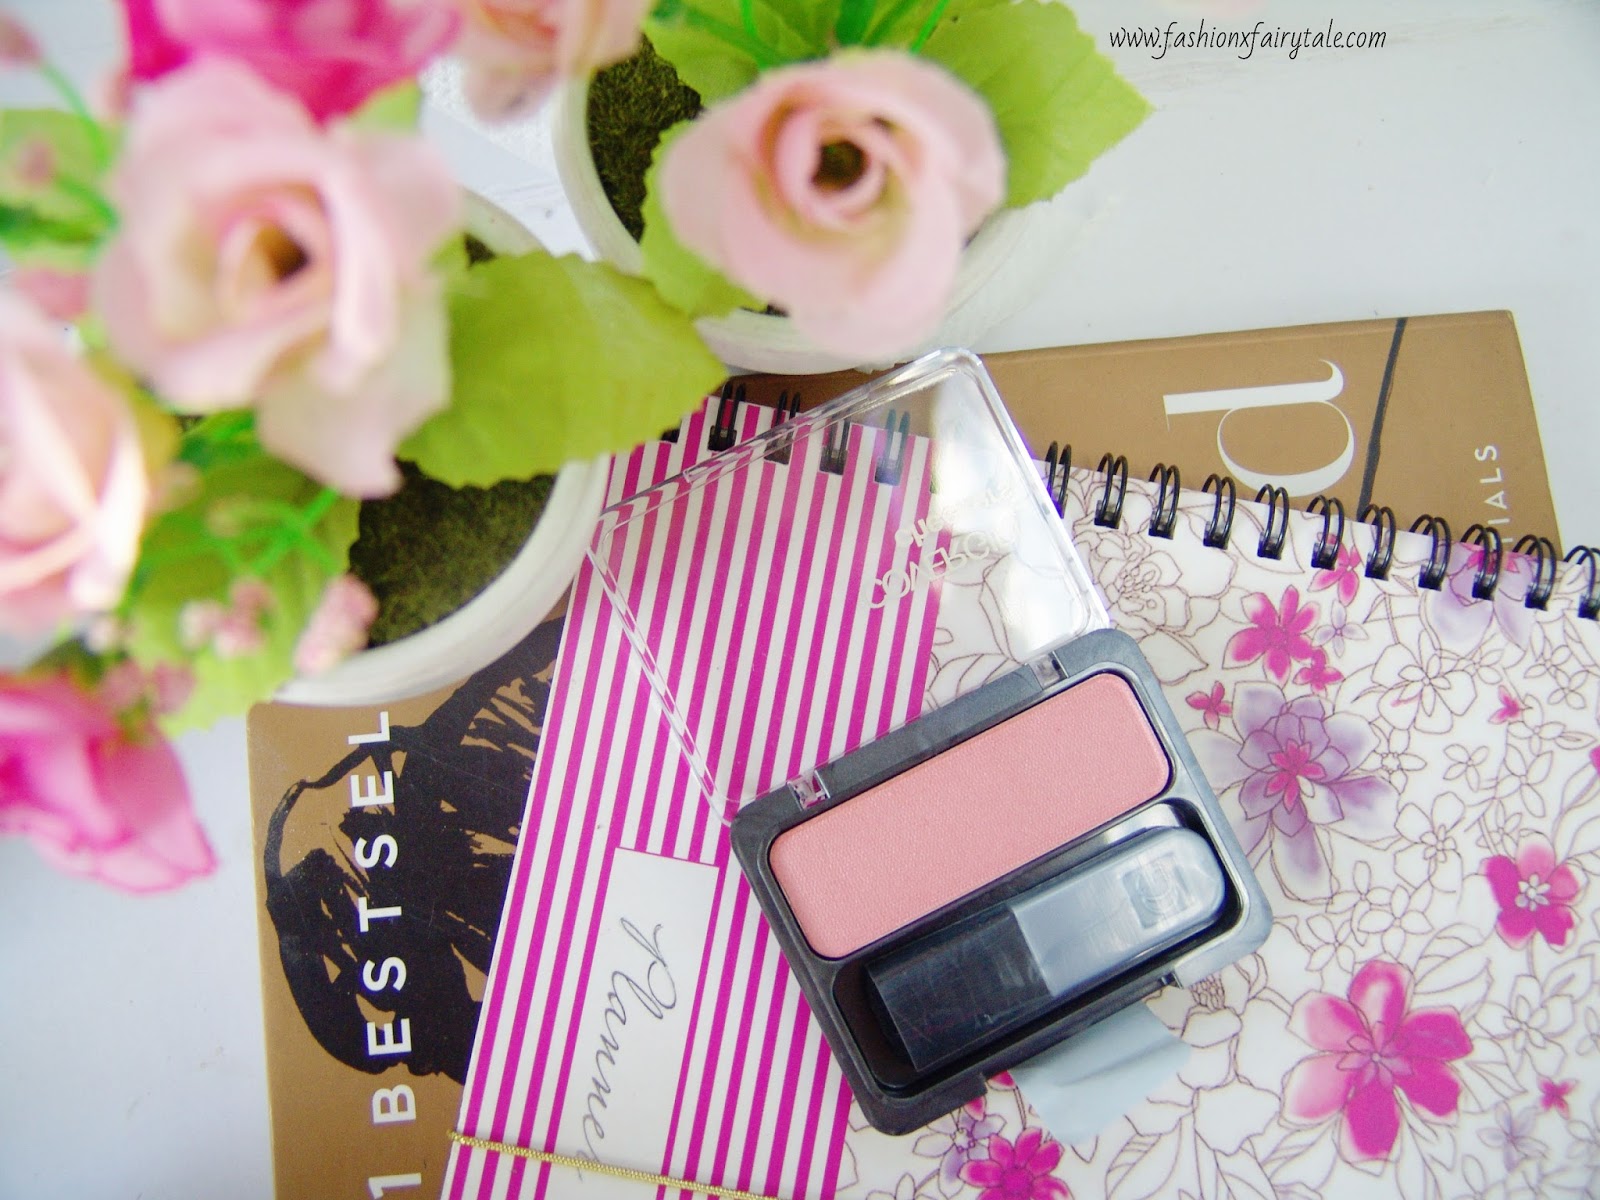 Covergirl Cheekers Blush  Review  Swatches - Fashion Fairytale